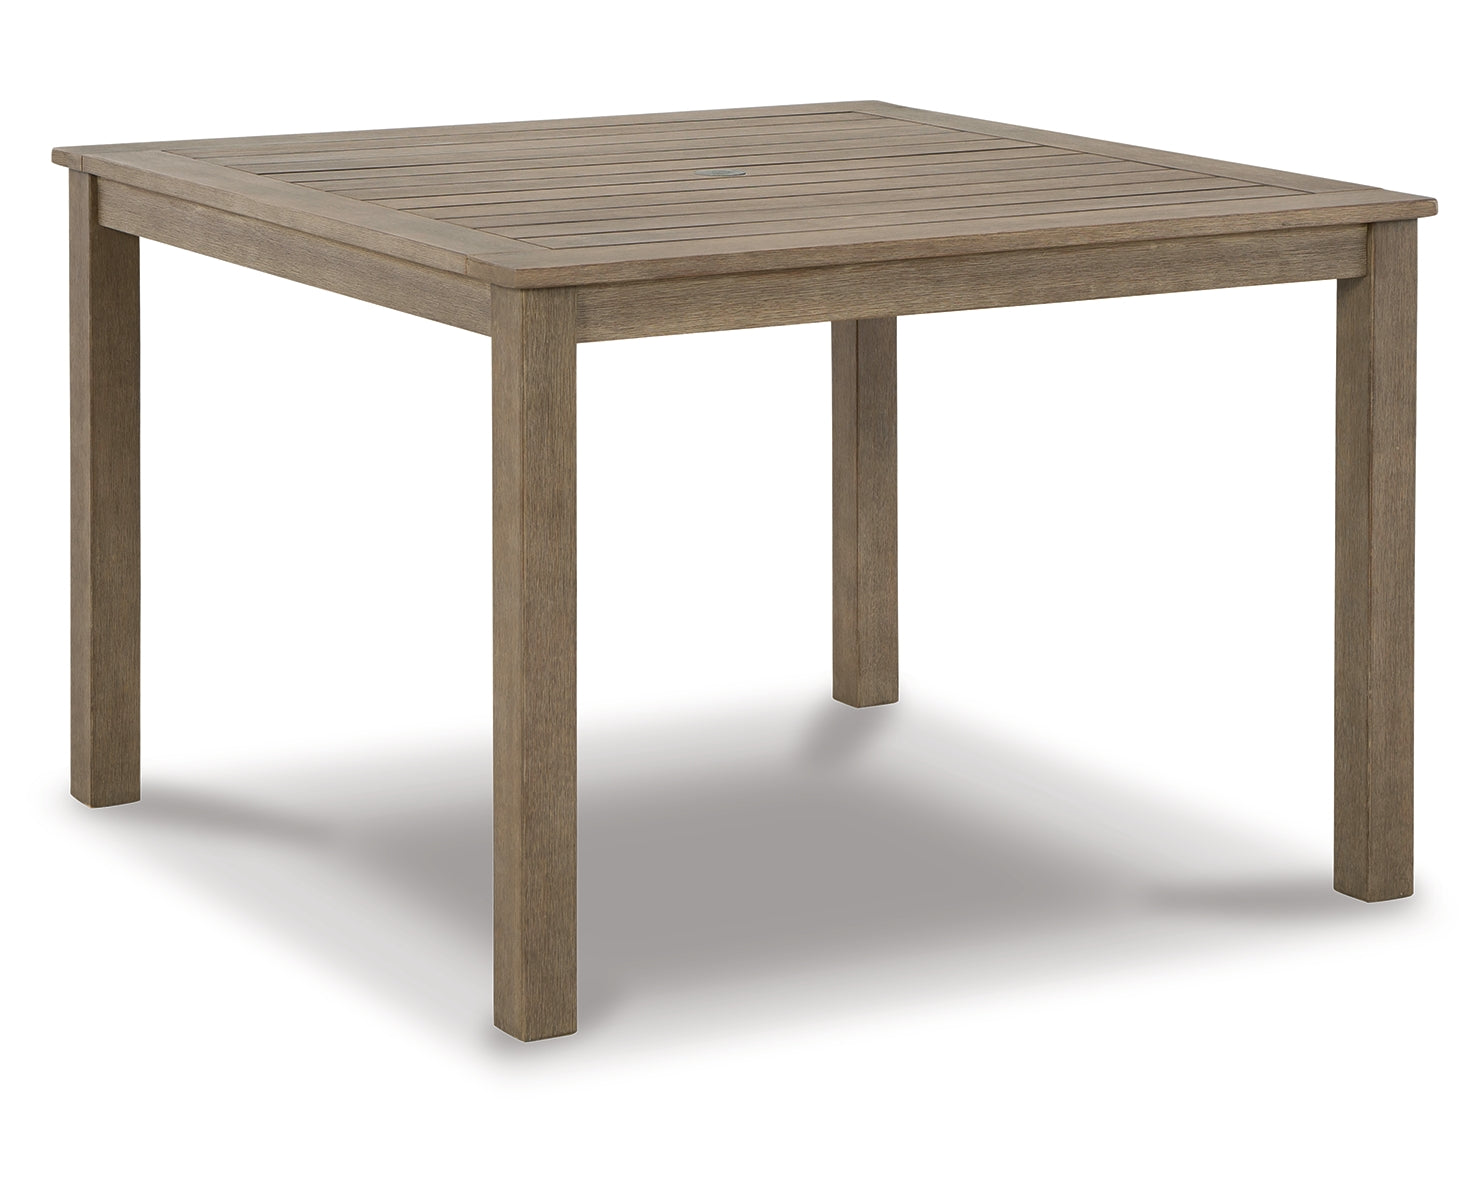 Aria Plains Outdoor Dining Table